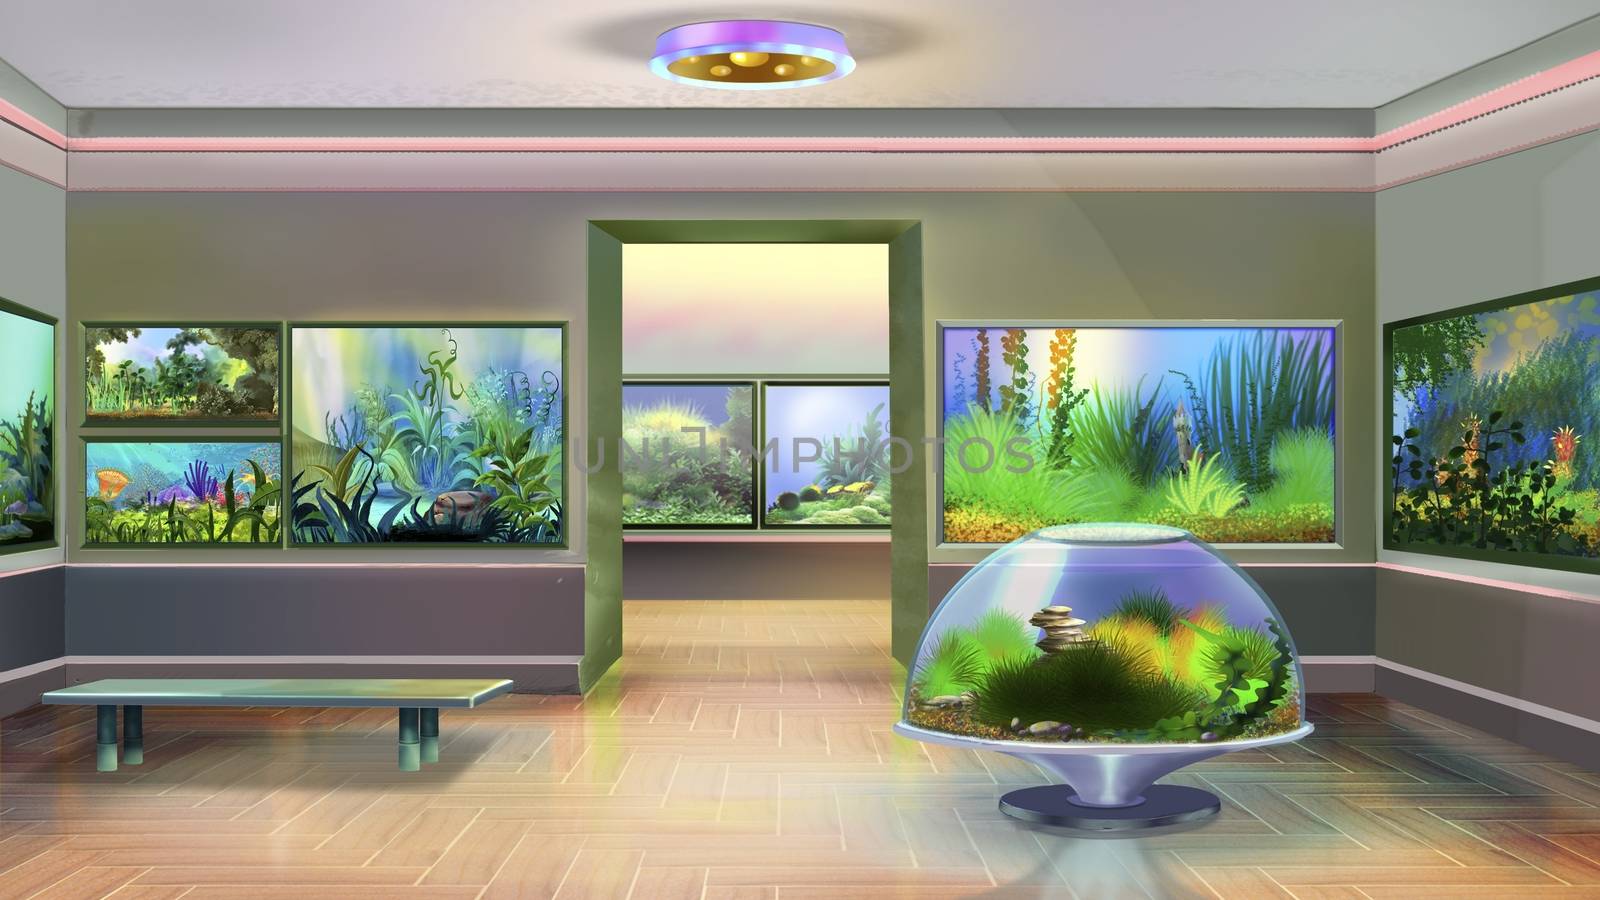 Digital painting of the interior of pet shop with aquariums.